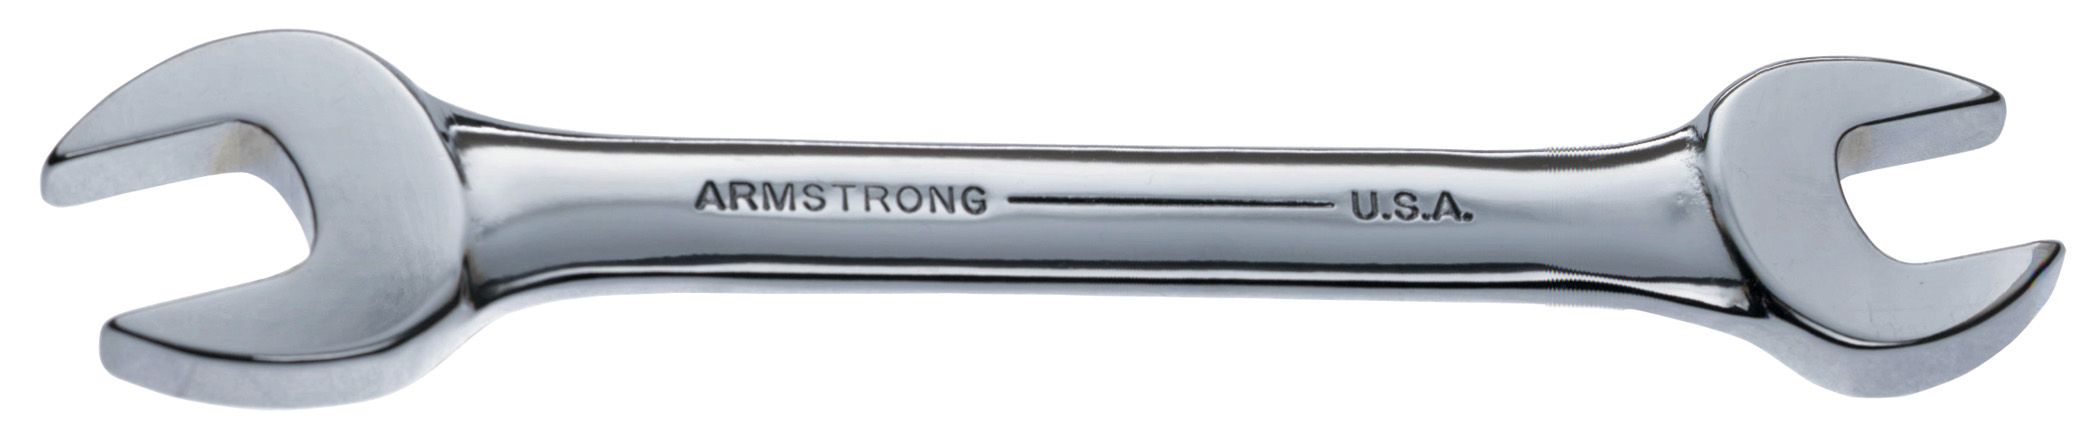 Armstrong 5/8 x 3/4 Full Polish Open End Wrench